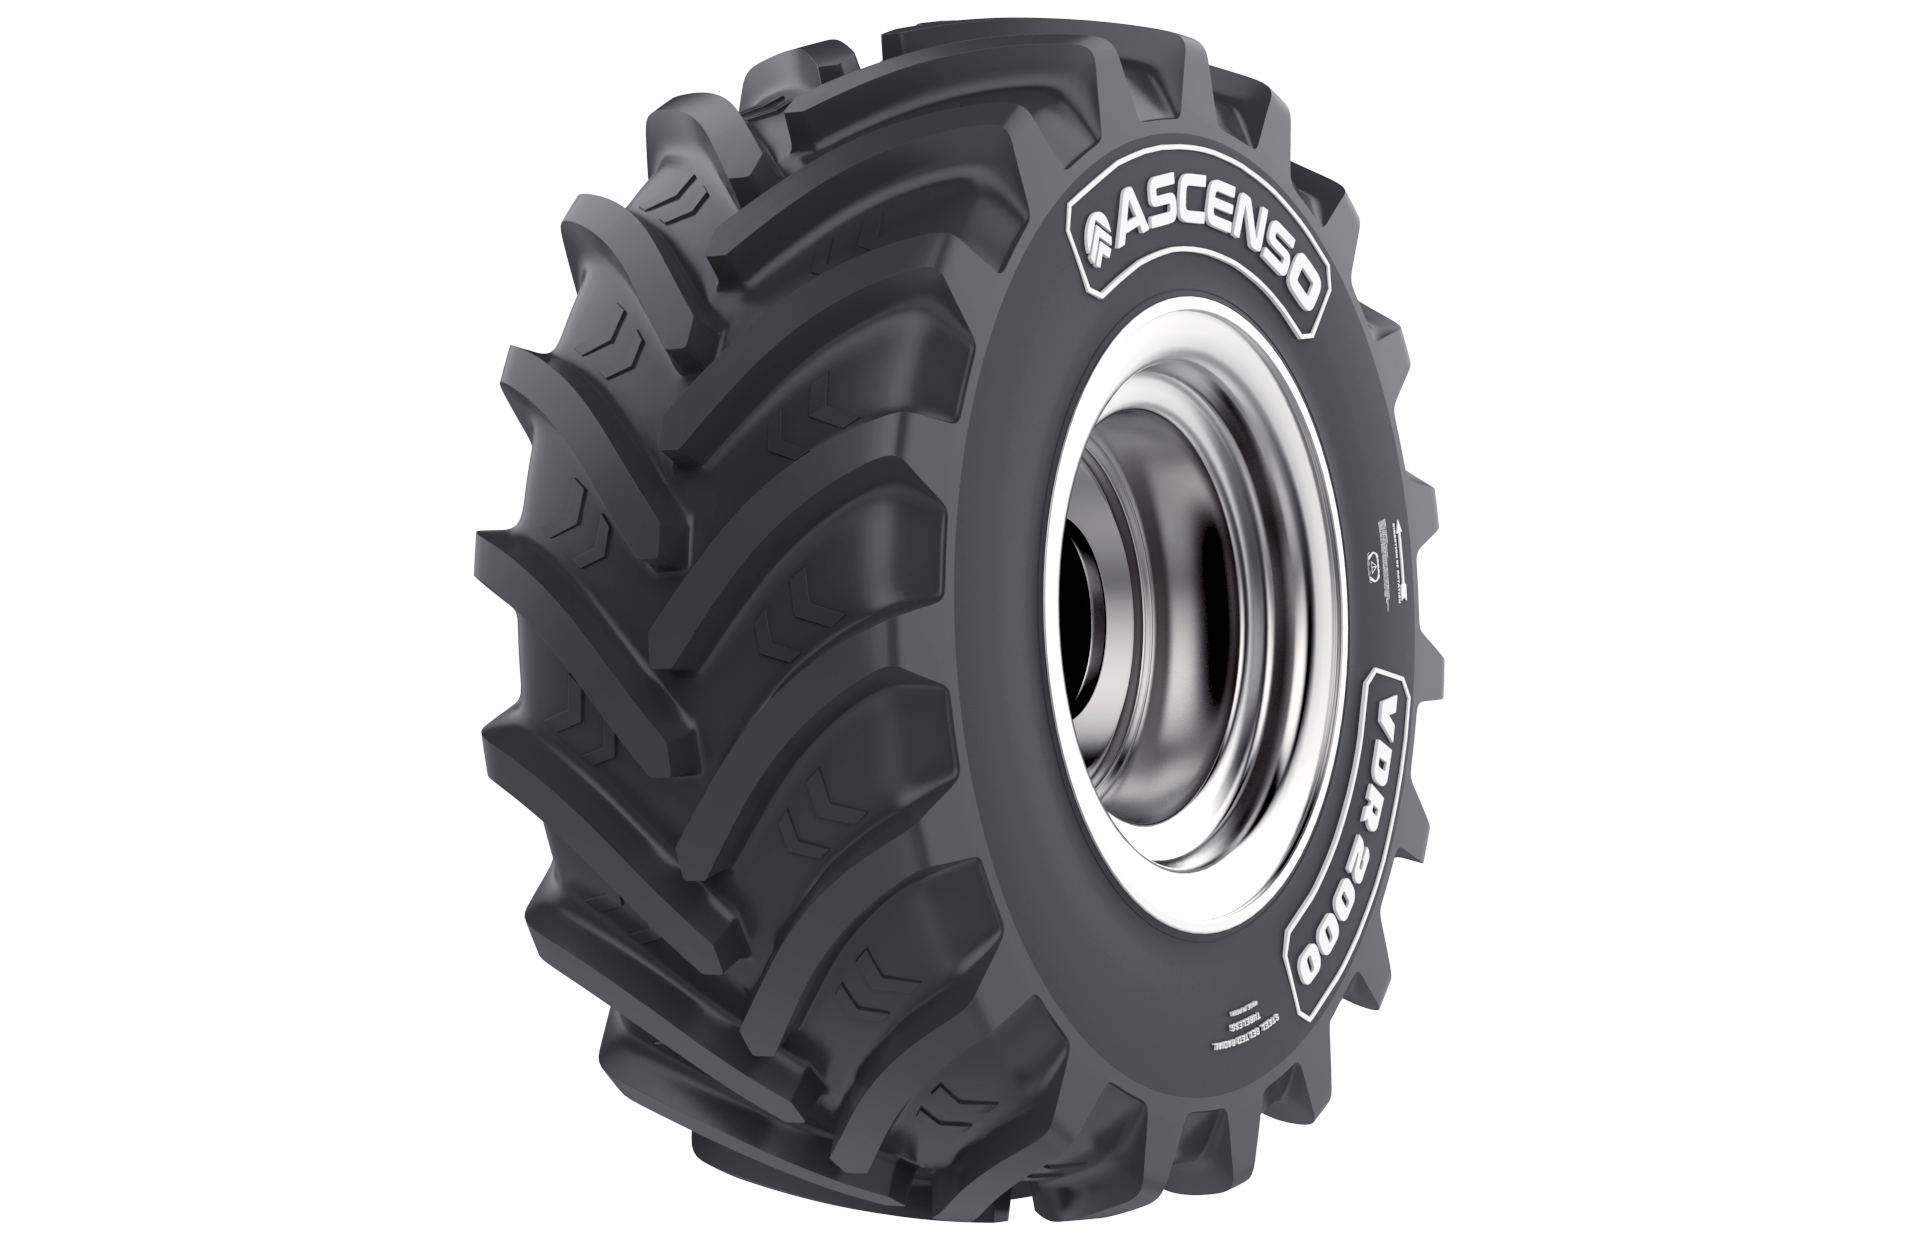 ASCENSO VF 650/65R38 NRO 180D R1-W TL VDR2000 STEEL BELTED